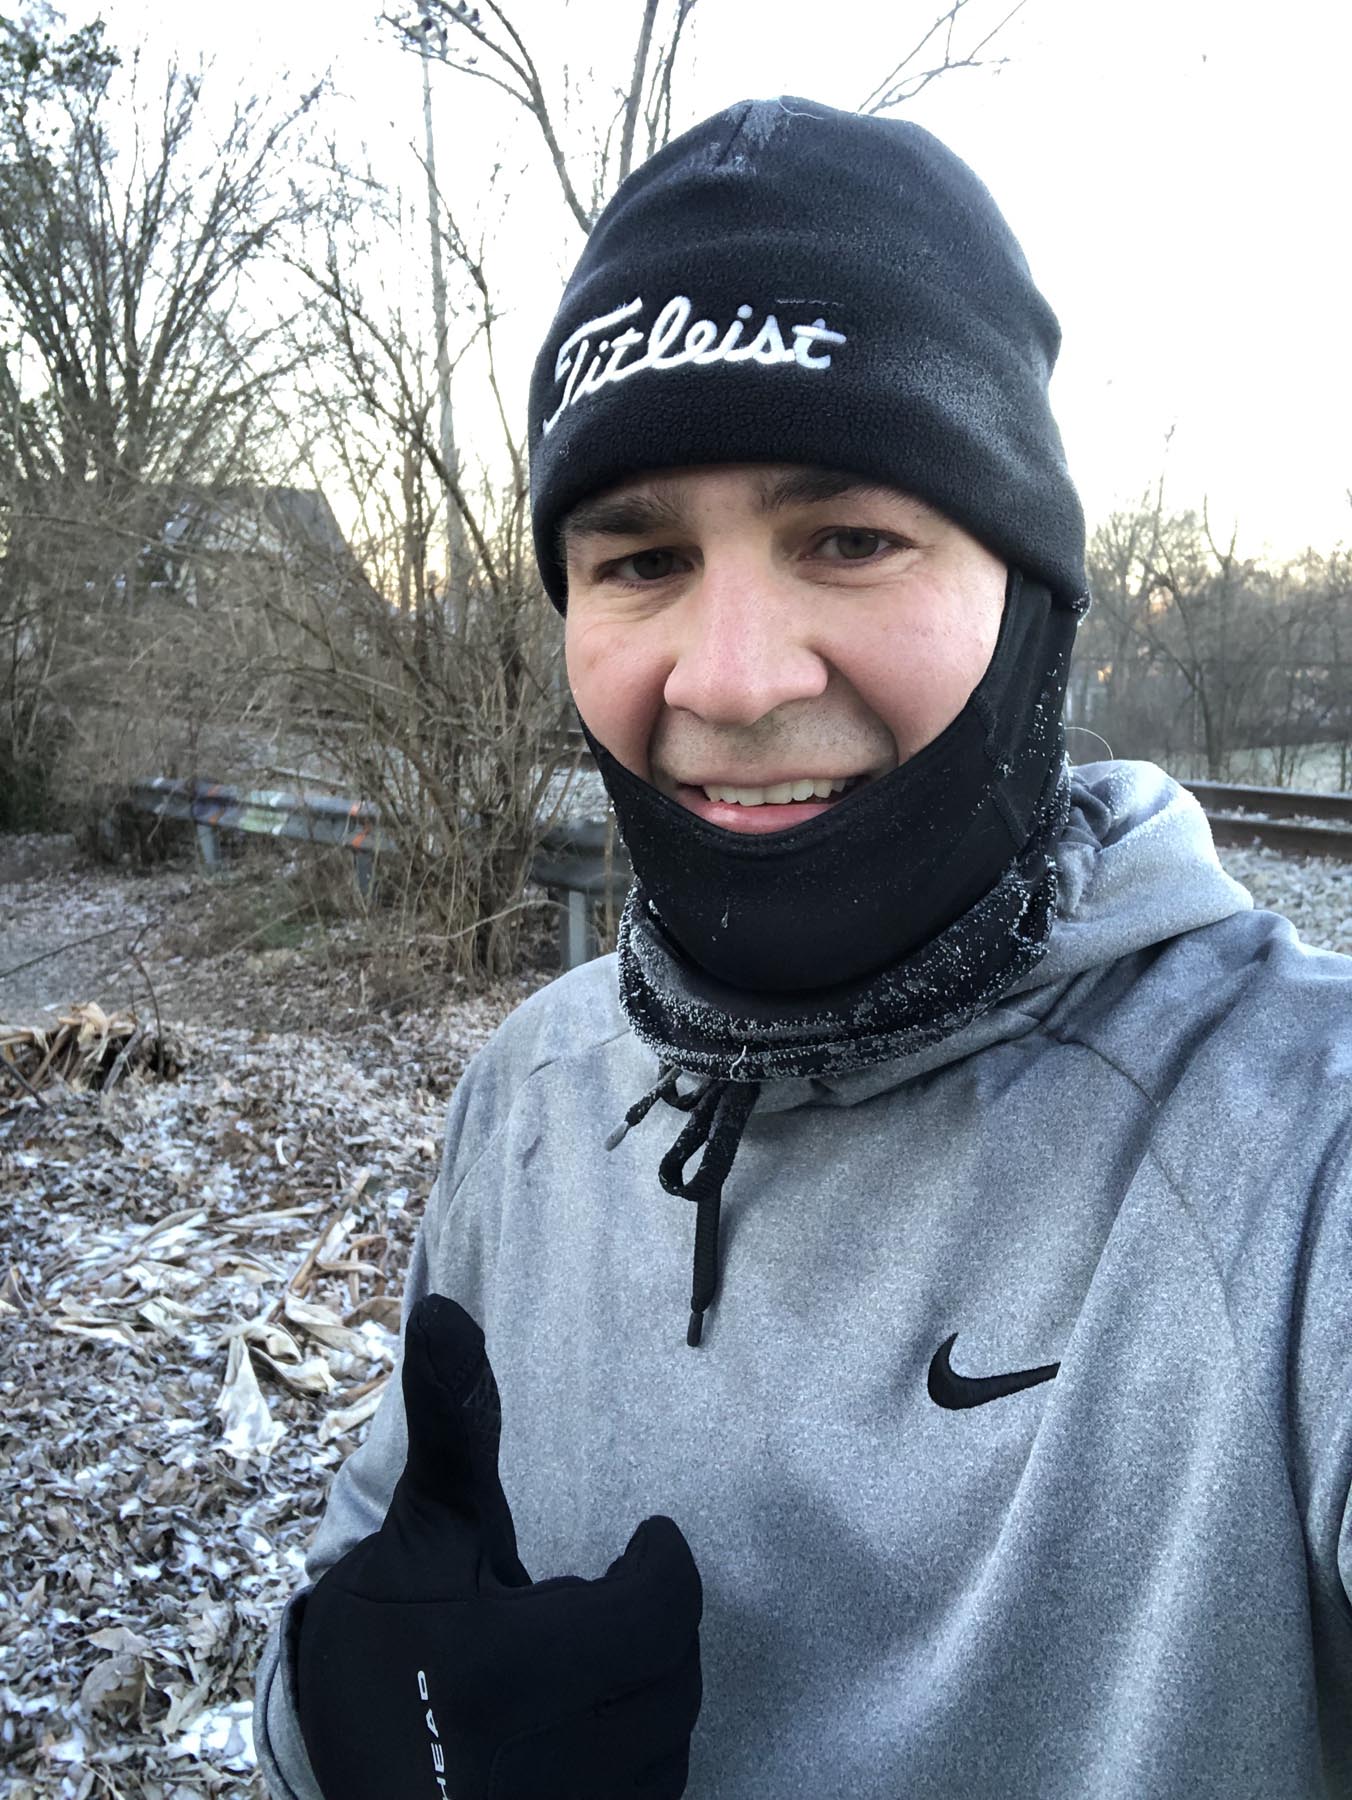 Nate Bell has been participating in an 18-week training program for his first marathon. Each week consists of six days of training — four days of running (miles increasing each week), two of lifting — with the seventh day being an off day. 